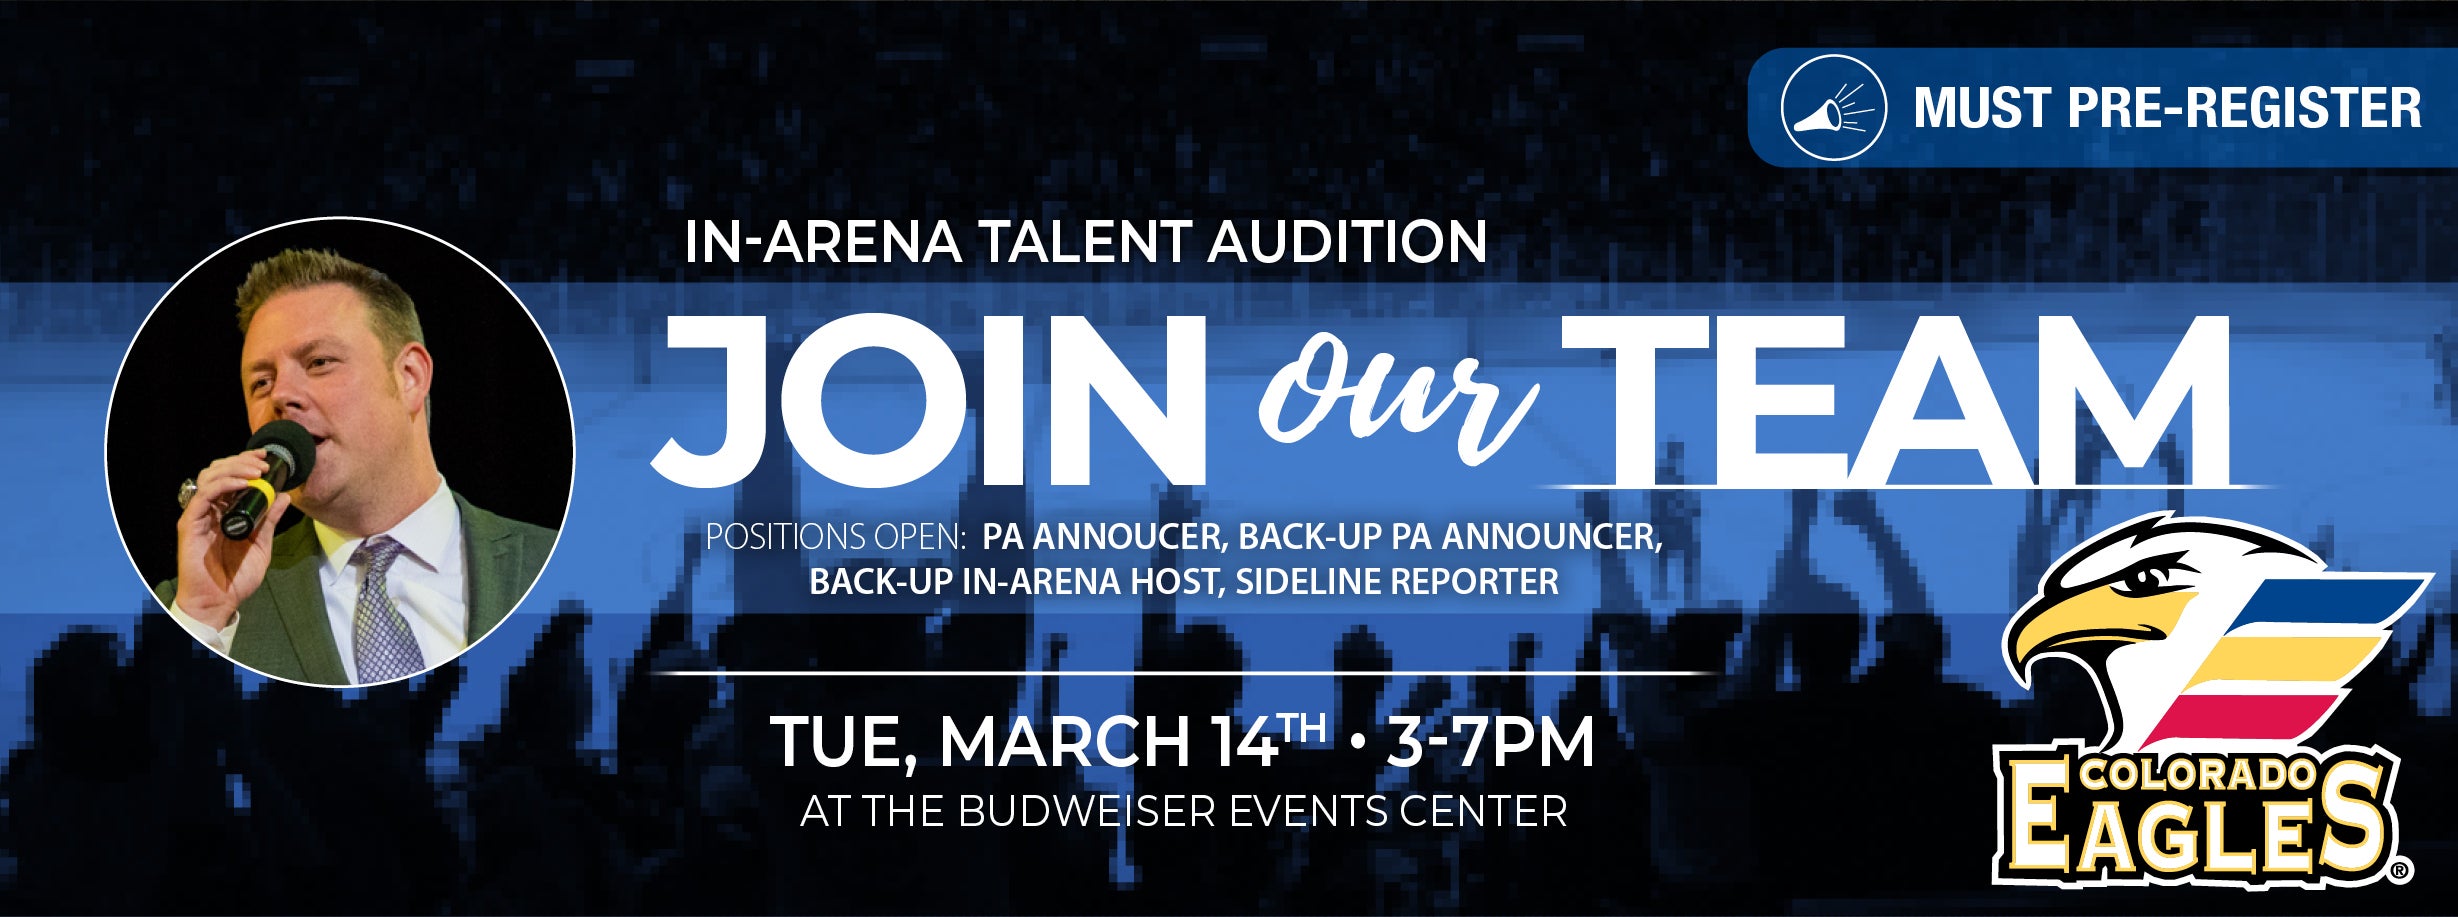 EAGLES TO HOST IN-ARENA TALENT AUDITION MARCH 14